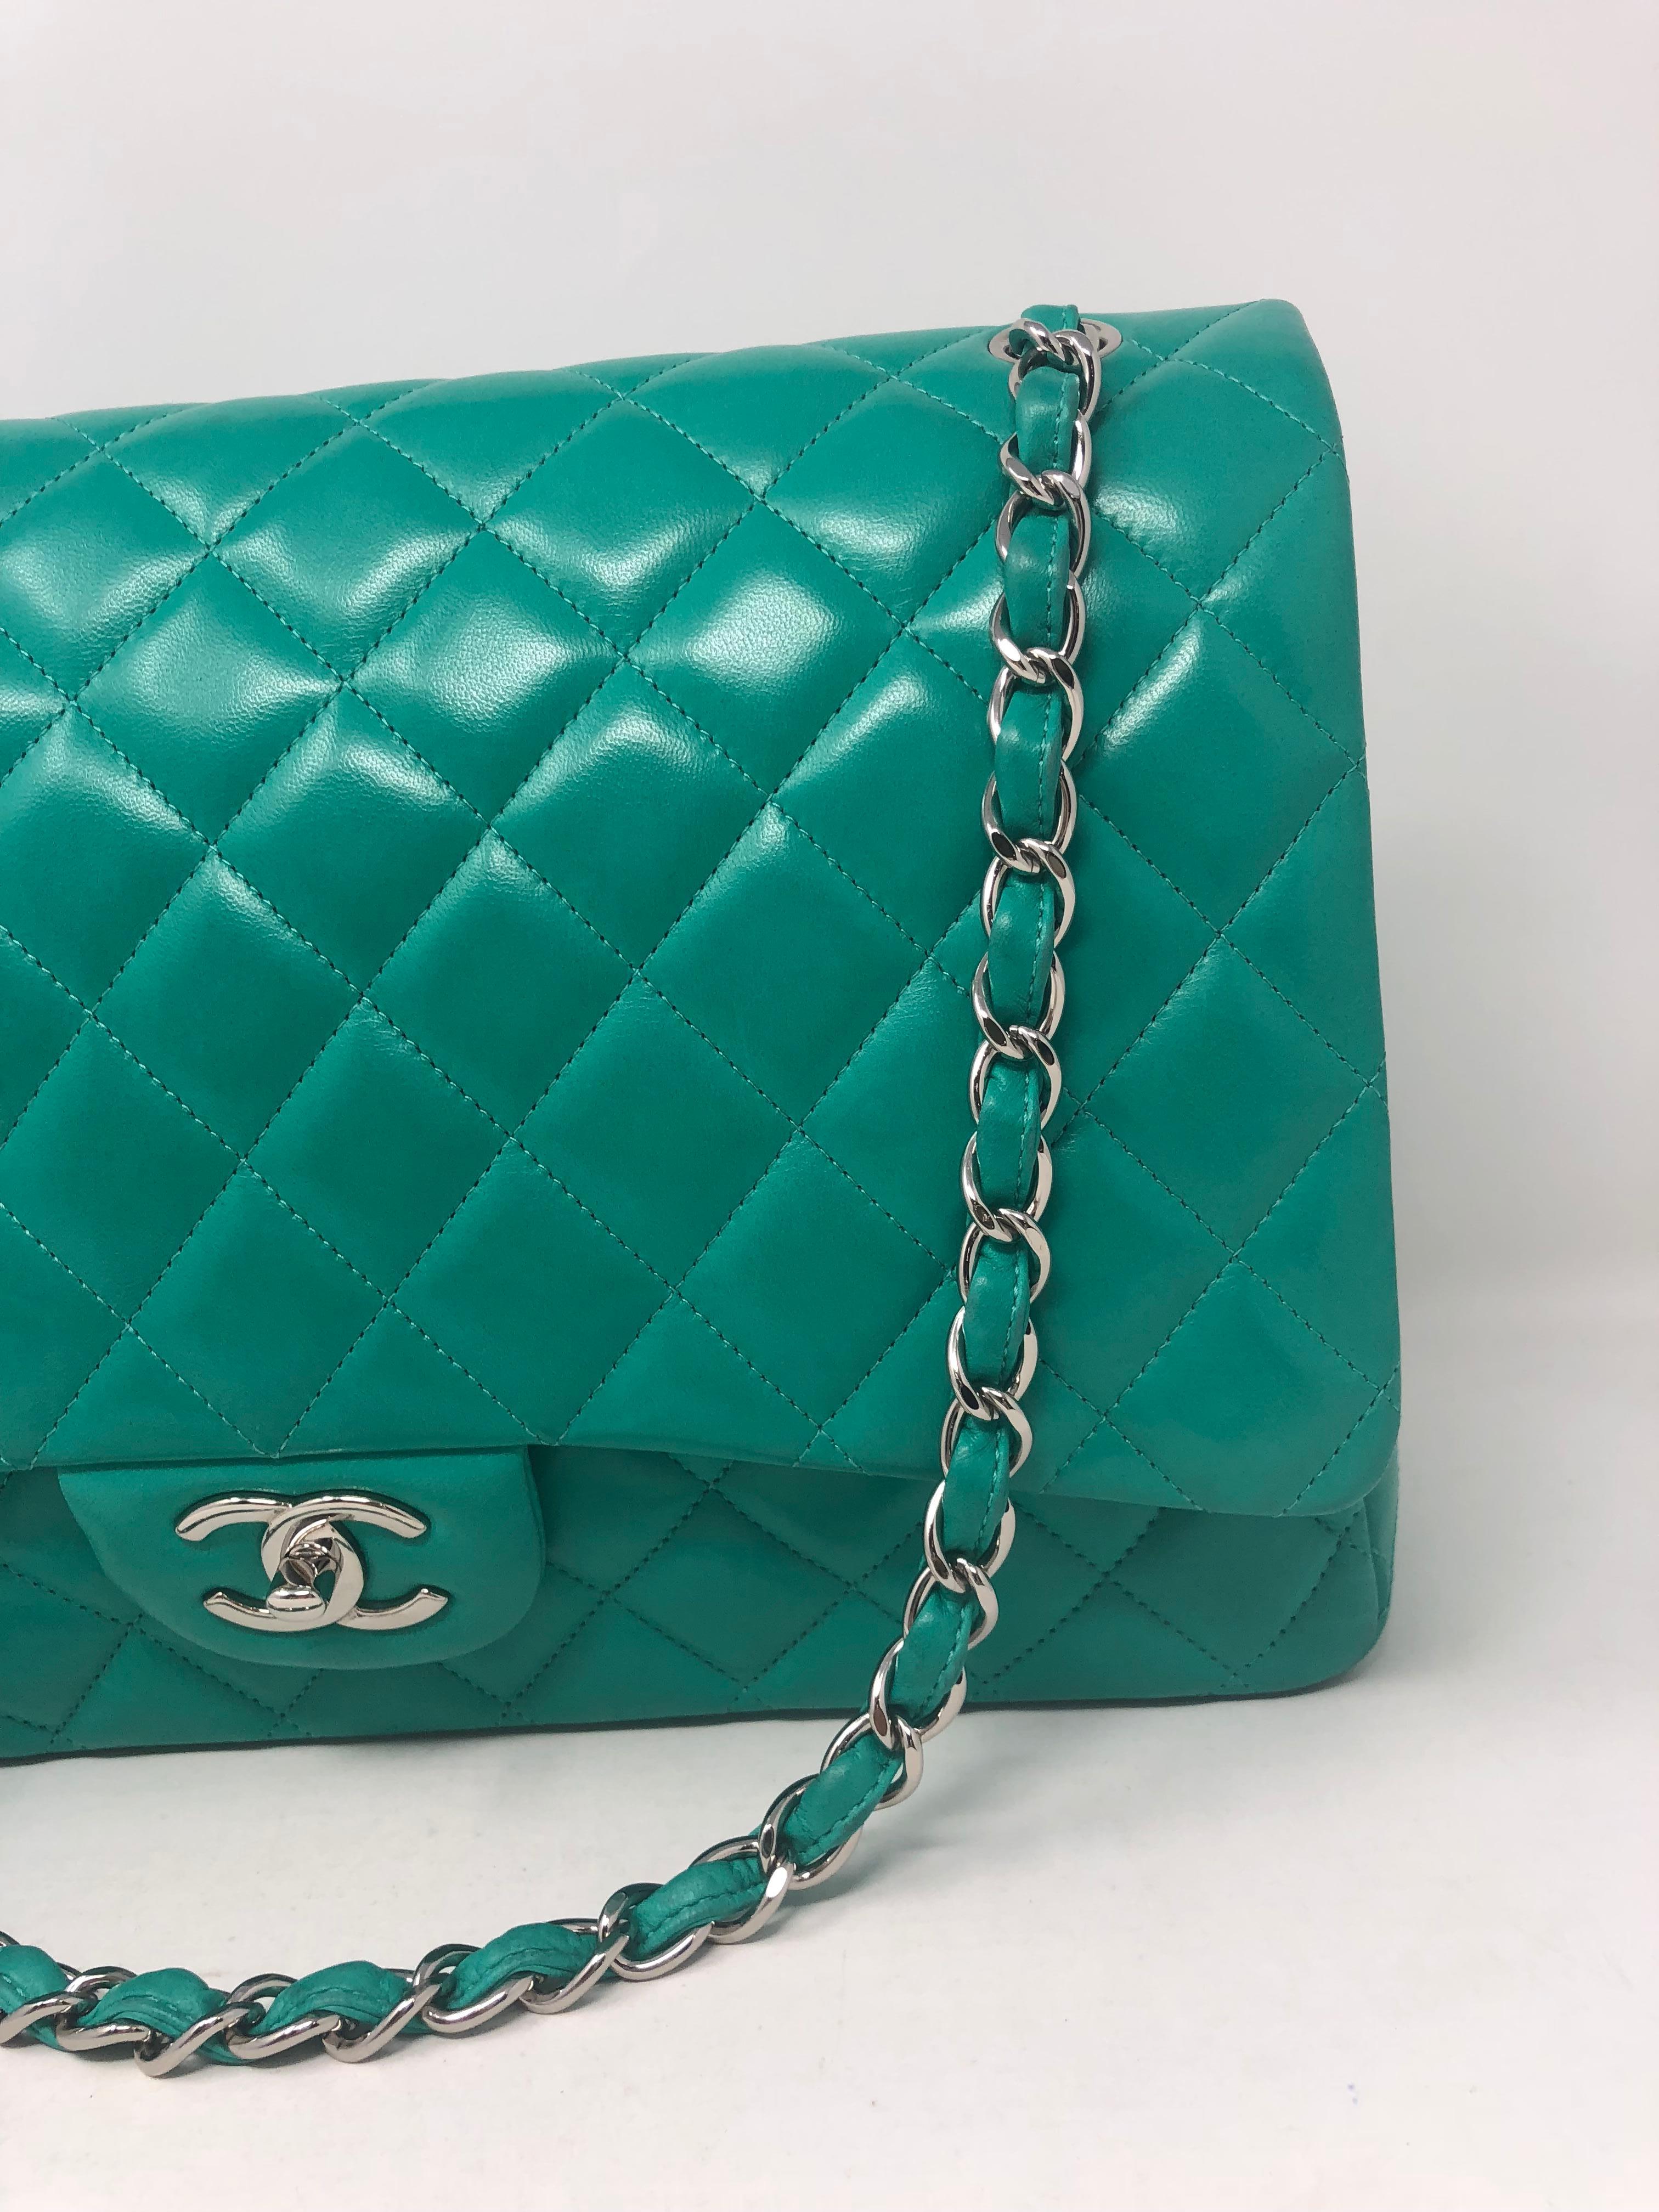 Chanel green menthe leather Maxi double flap bag. Beautiful minty green lambskin leather. Can be worn doubled or as a crossbody. Guaranteed authentic. 